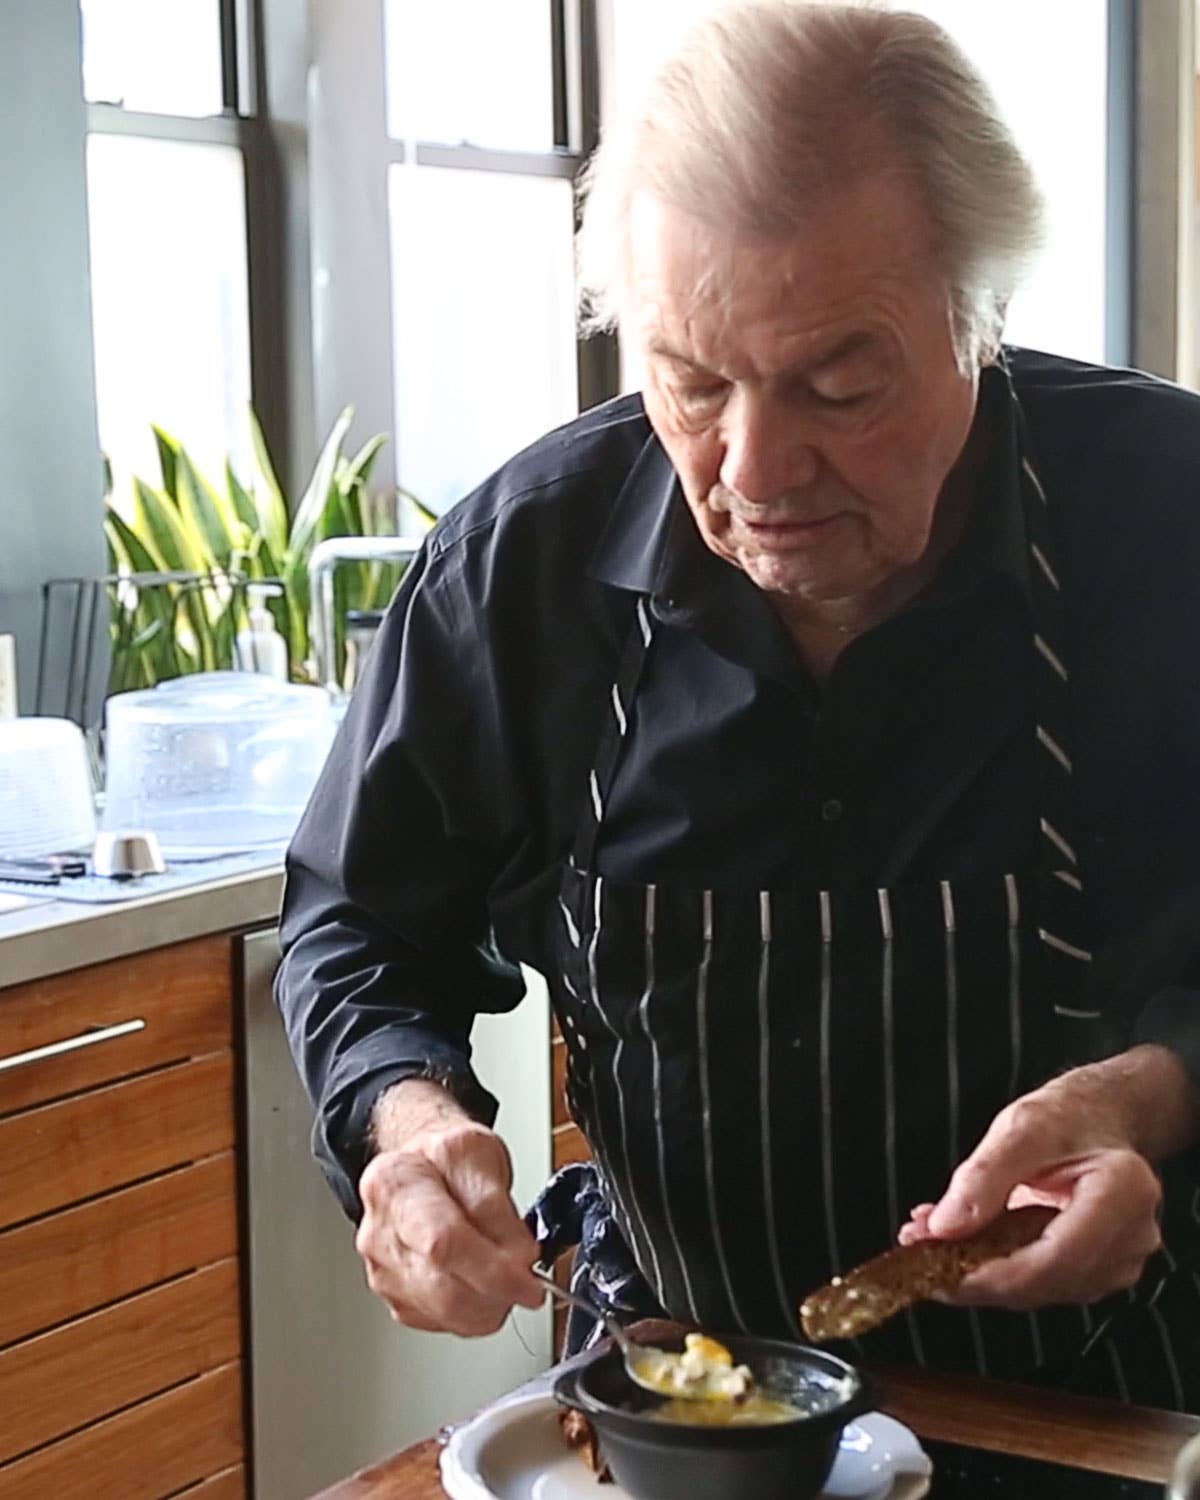 Let the Legendary Jacques Pépin Show You How to Make the Perfect Omelette